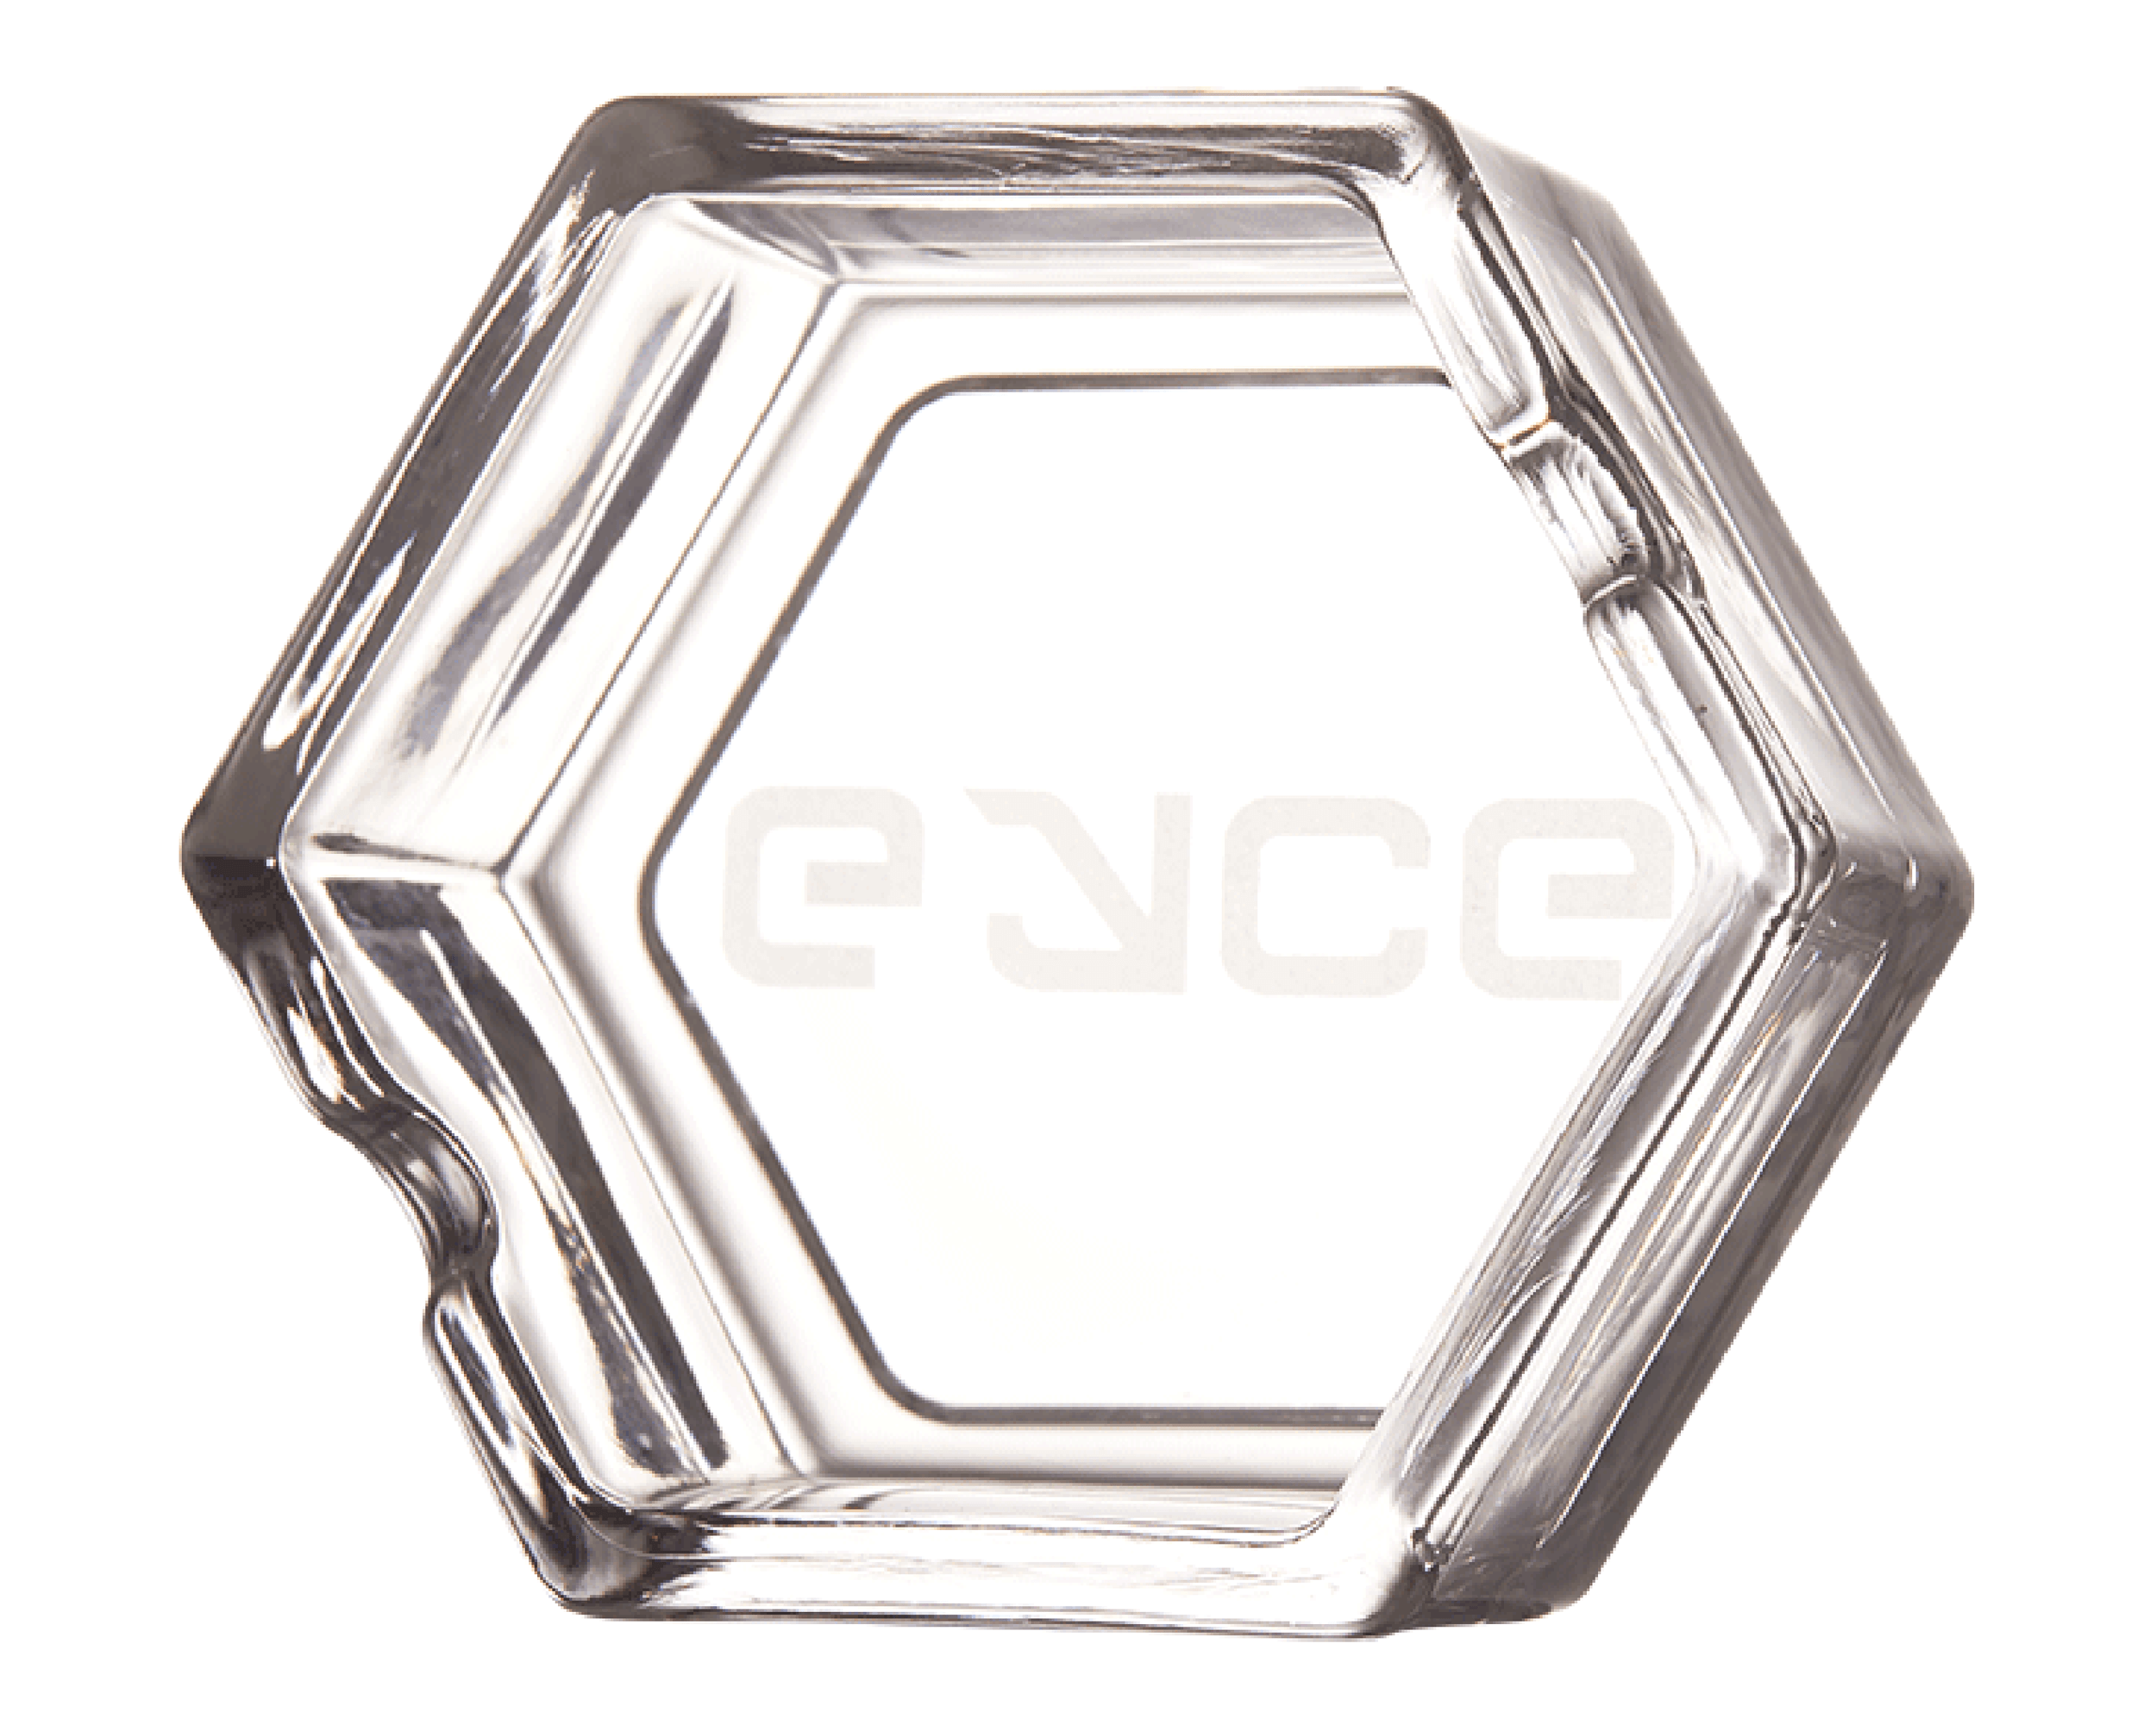 Eyce | 'Retail Display' 2-In-1 Proteck Series Ash Trays | 6in - Assorted - 10 Count - 3